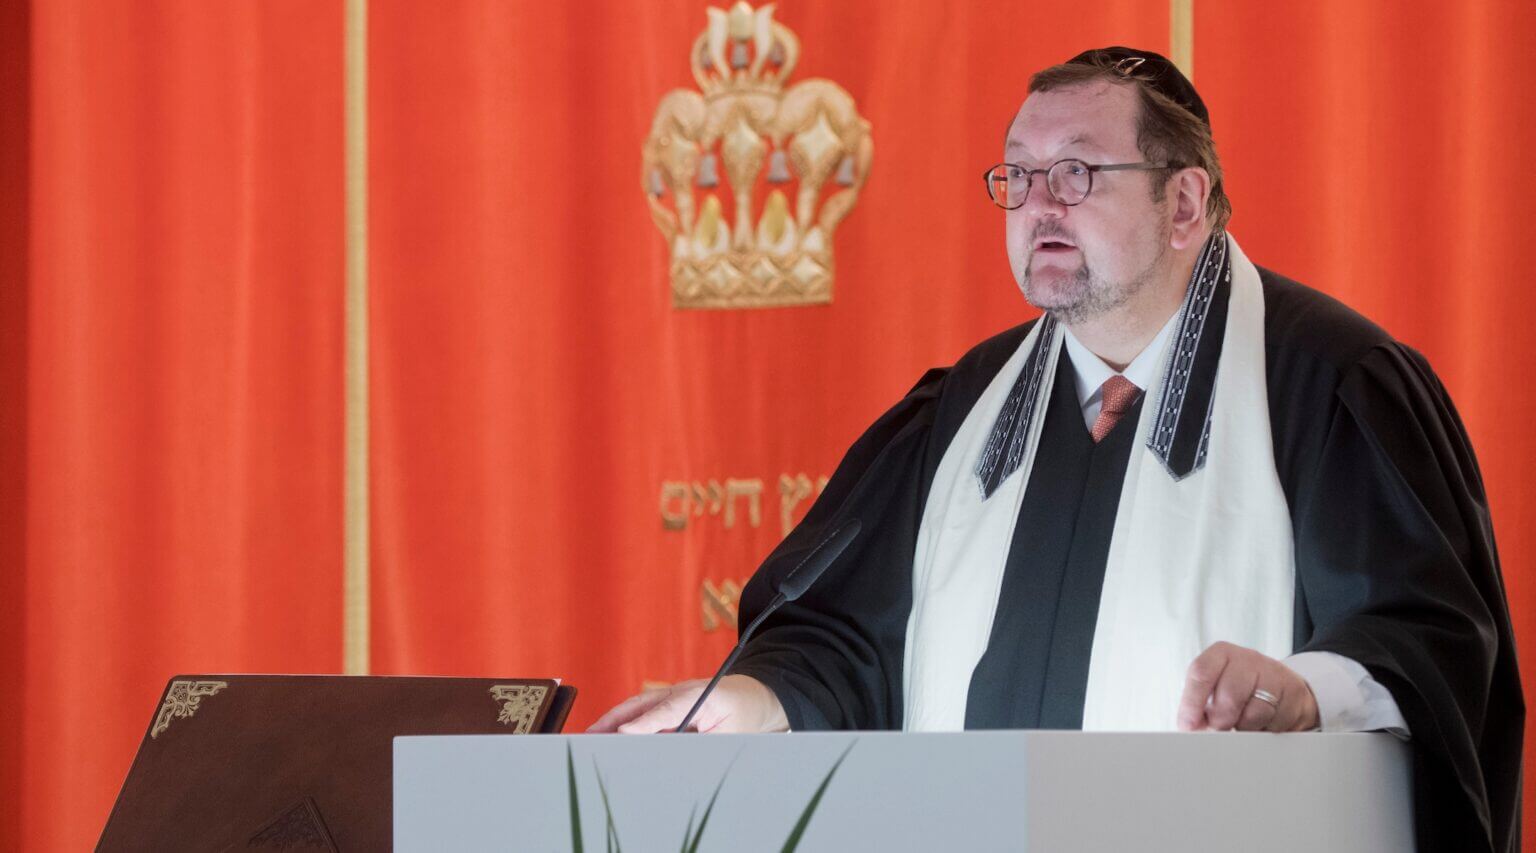 Rabbi Walter Homolka, then rector of the Abraham Geiger College, in the Liberal Jewish community’s synagogue in Hanover, Germany in December 2016.